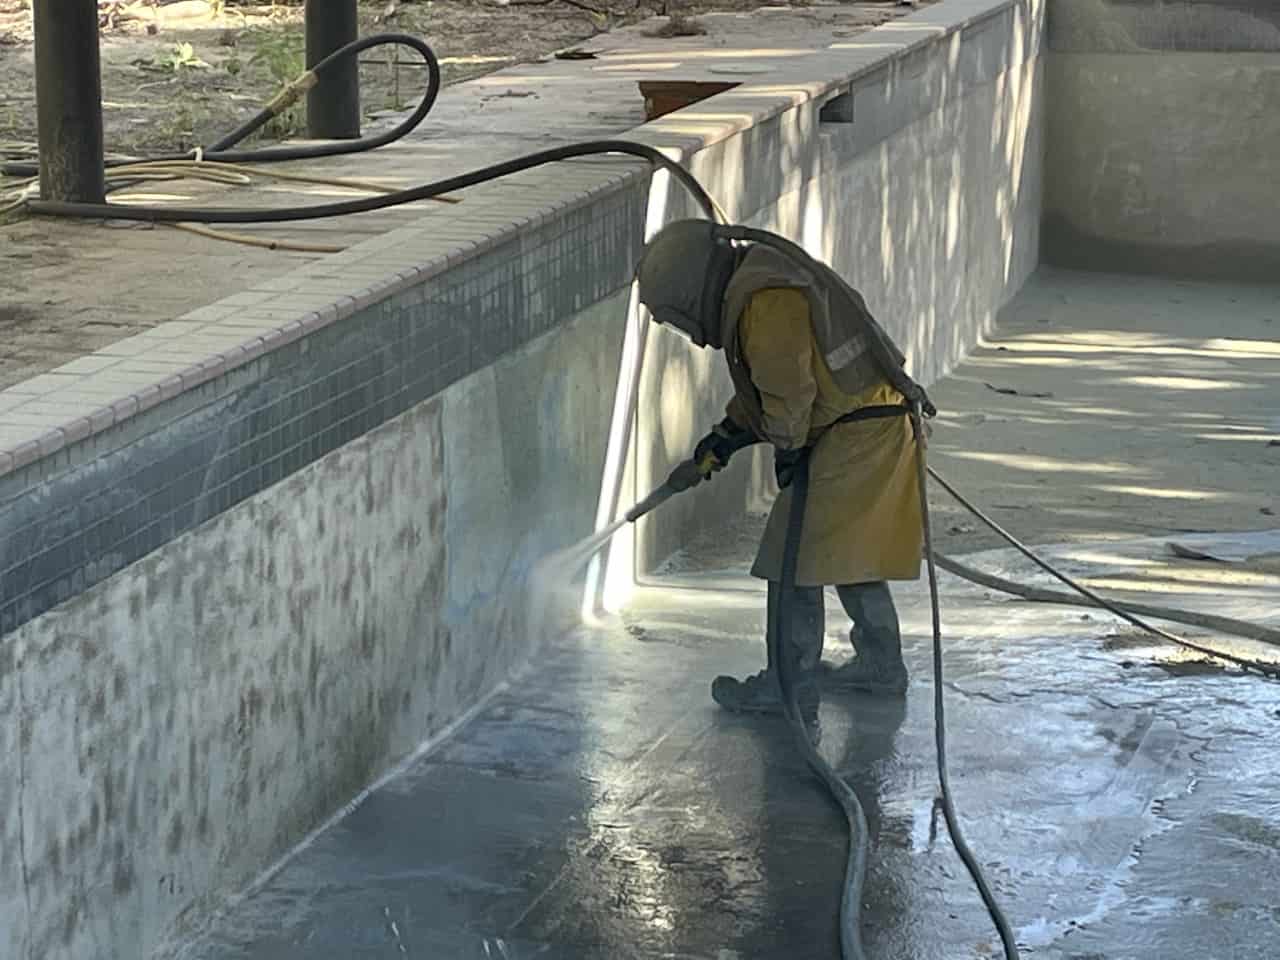 Empty pool with man hosing the sides